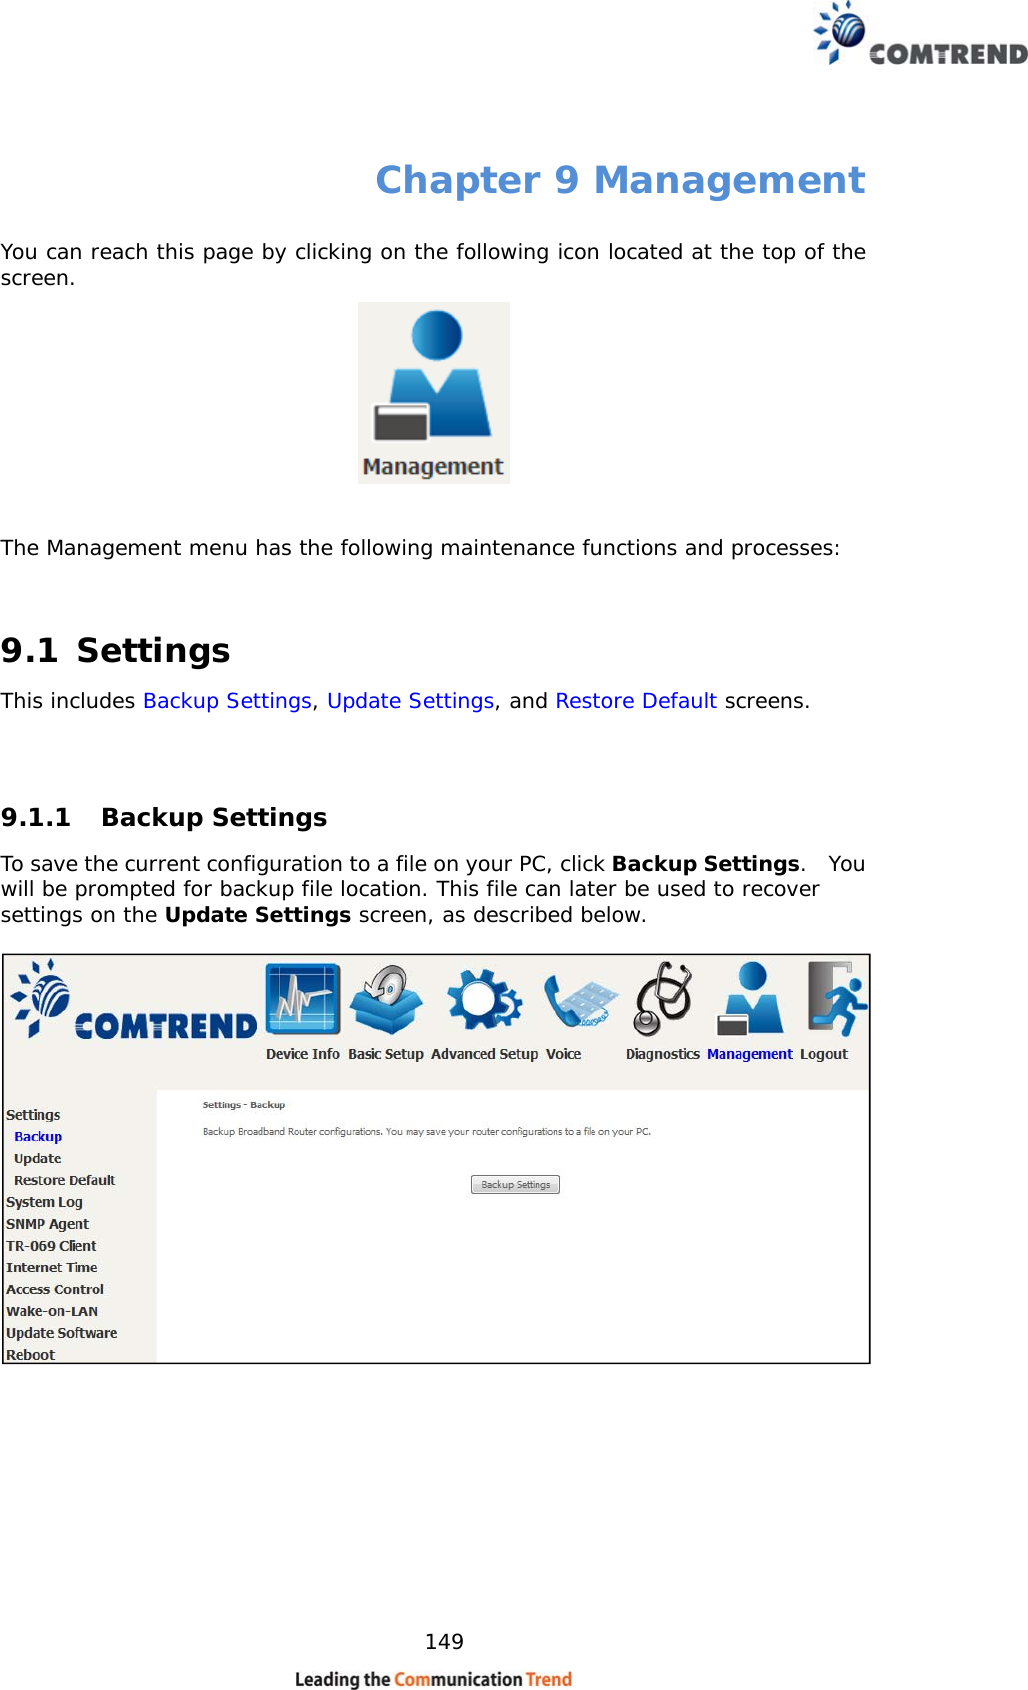    149 Chapter 9 Management You can reach this page by clicking on the following icon located at the top of the screen.    The Management menu has the following maintenance functions and processes:   9.1 Settings This includes Backup Settings, Update Settings, and Restore Default screens.   9.1.1 Backup Settings  To save the current configuration to a file on your PC, click Backup Settings.  You will be prompted for backup file location. This file can later be used to recover settings on the Update Settings screen, as described below.    